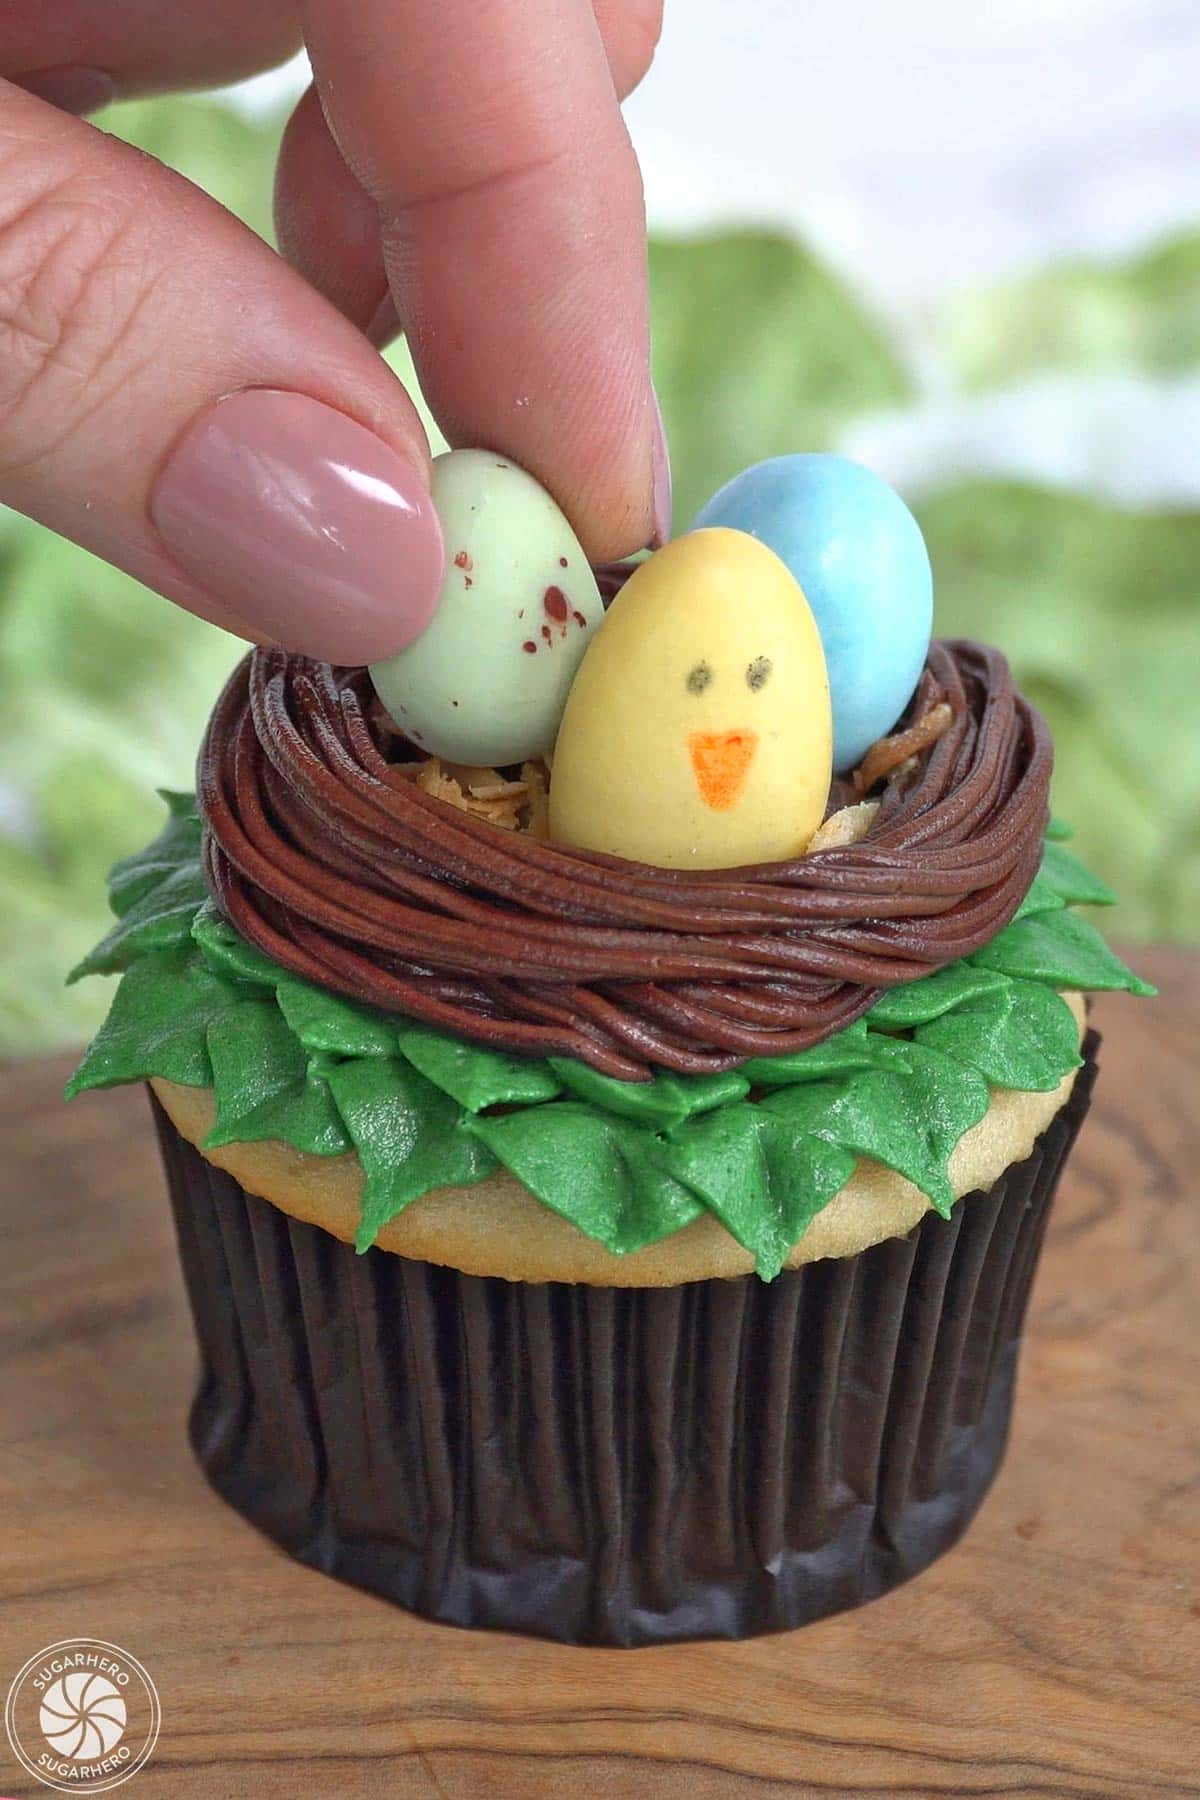 Placing candy eggs into a buttercream nest on top of a cupcake.